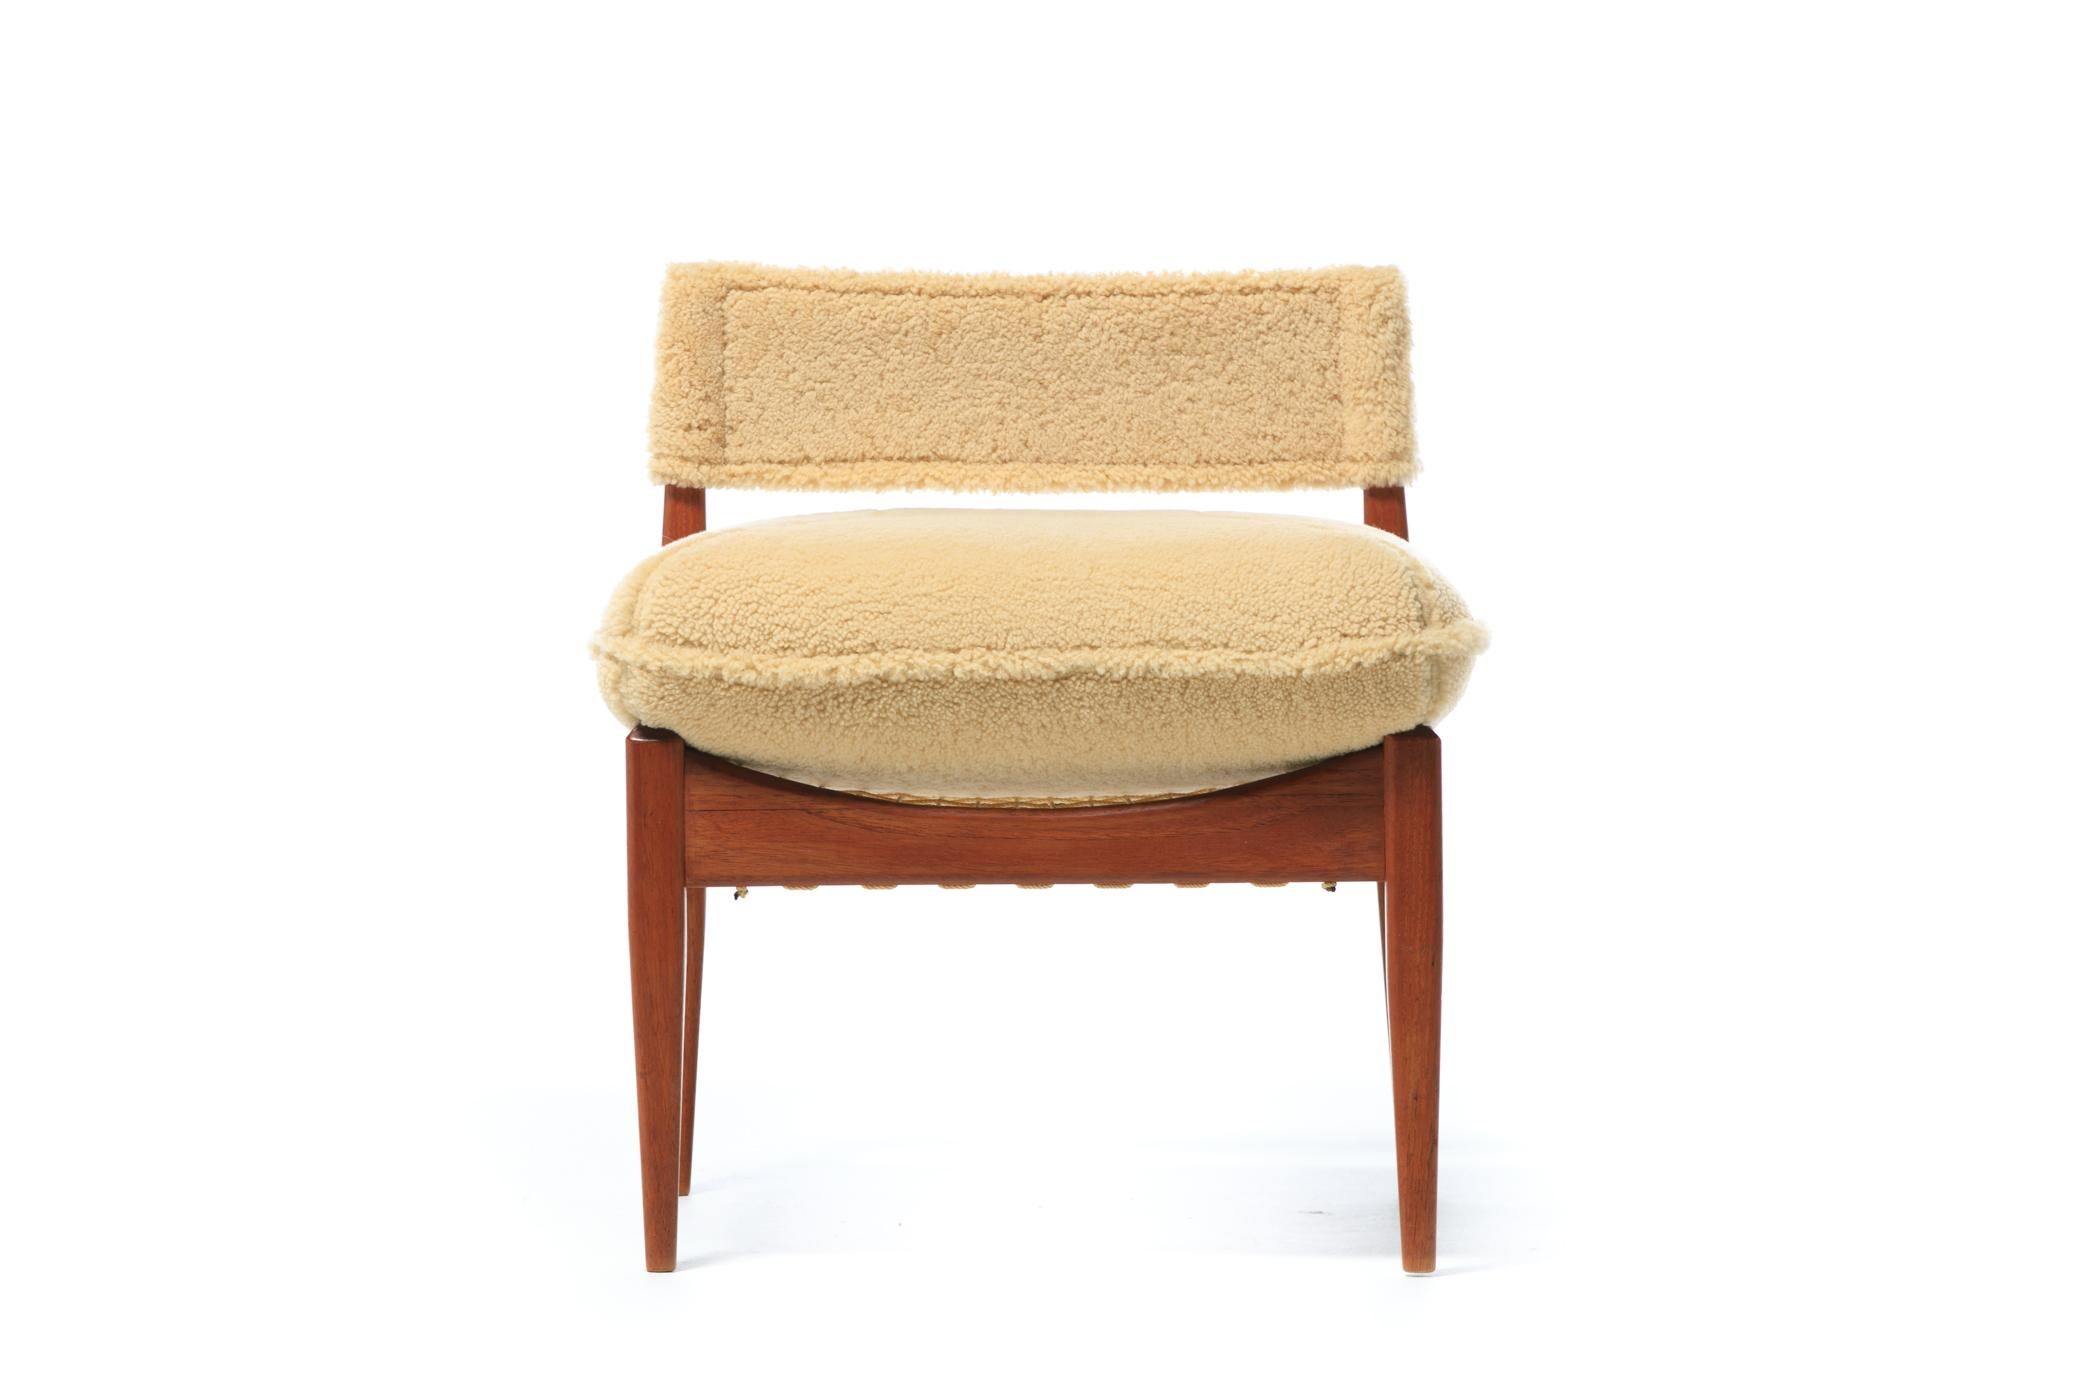 Mid-20th Century Danish Modern Pair of Kristian Vedel Style Lounge Chairs in Palomino Shearling For Sale